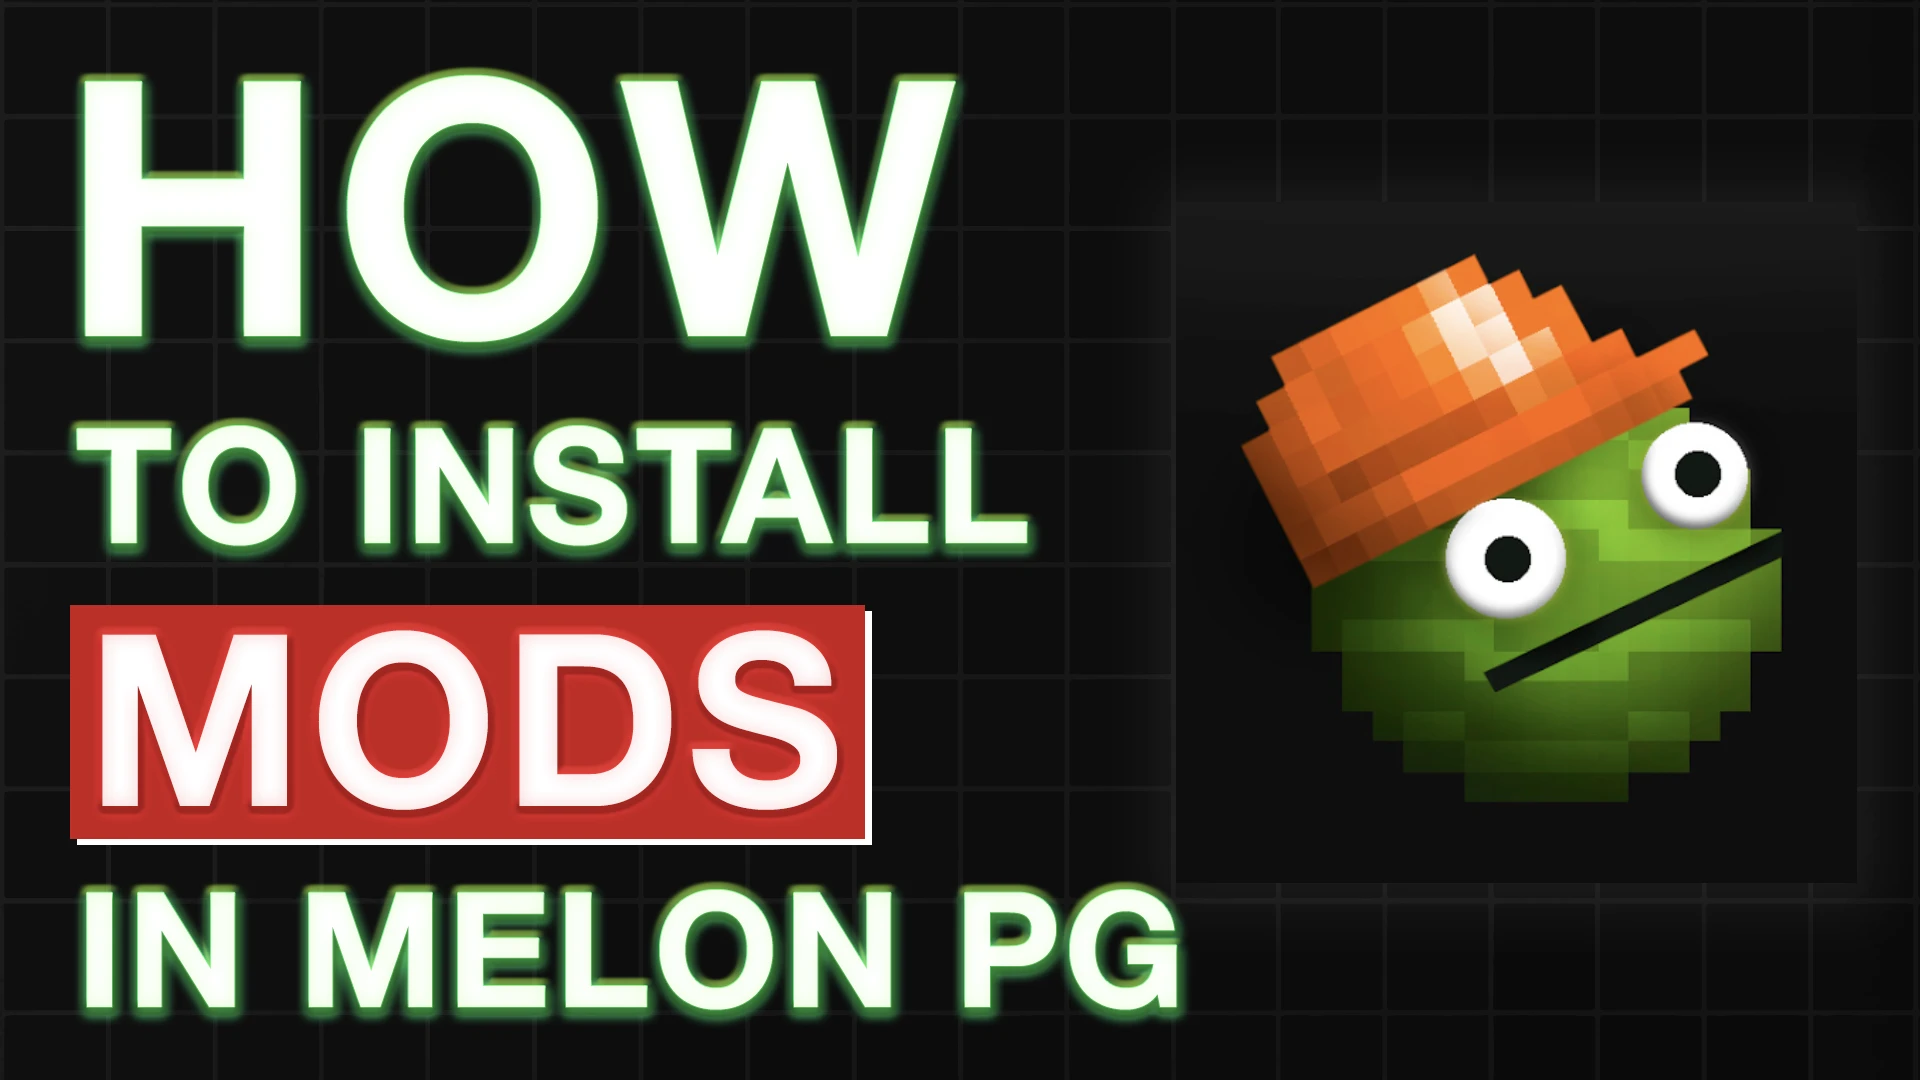 HOW TO INSTALL MODS IN MELON PLAYGROUND